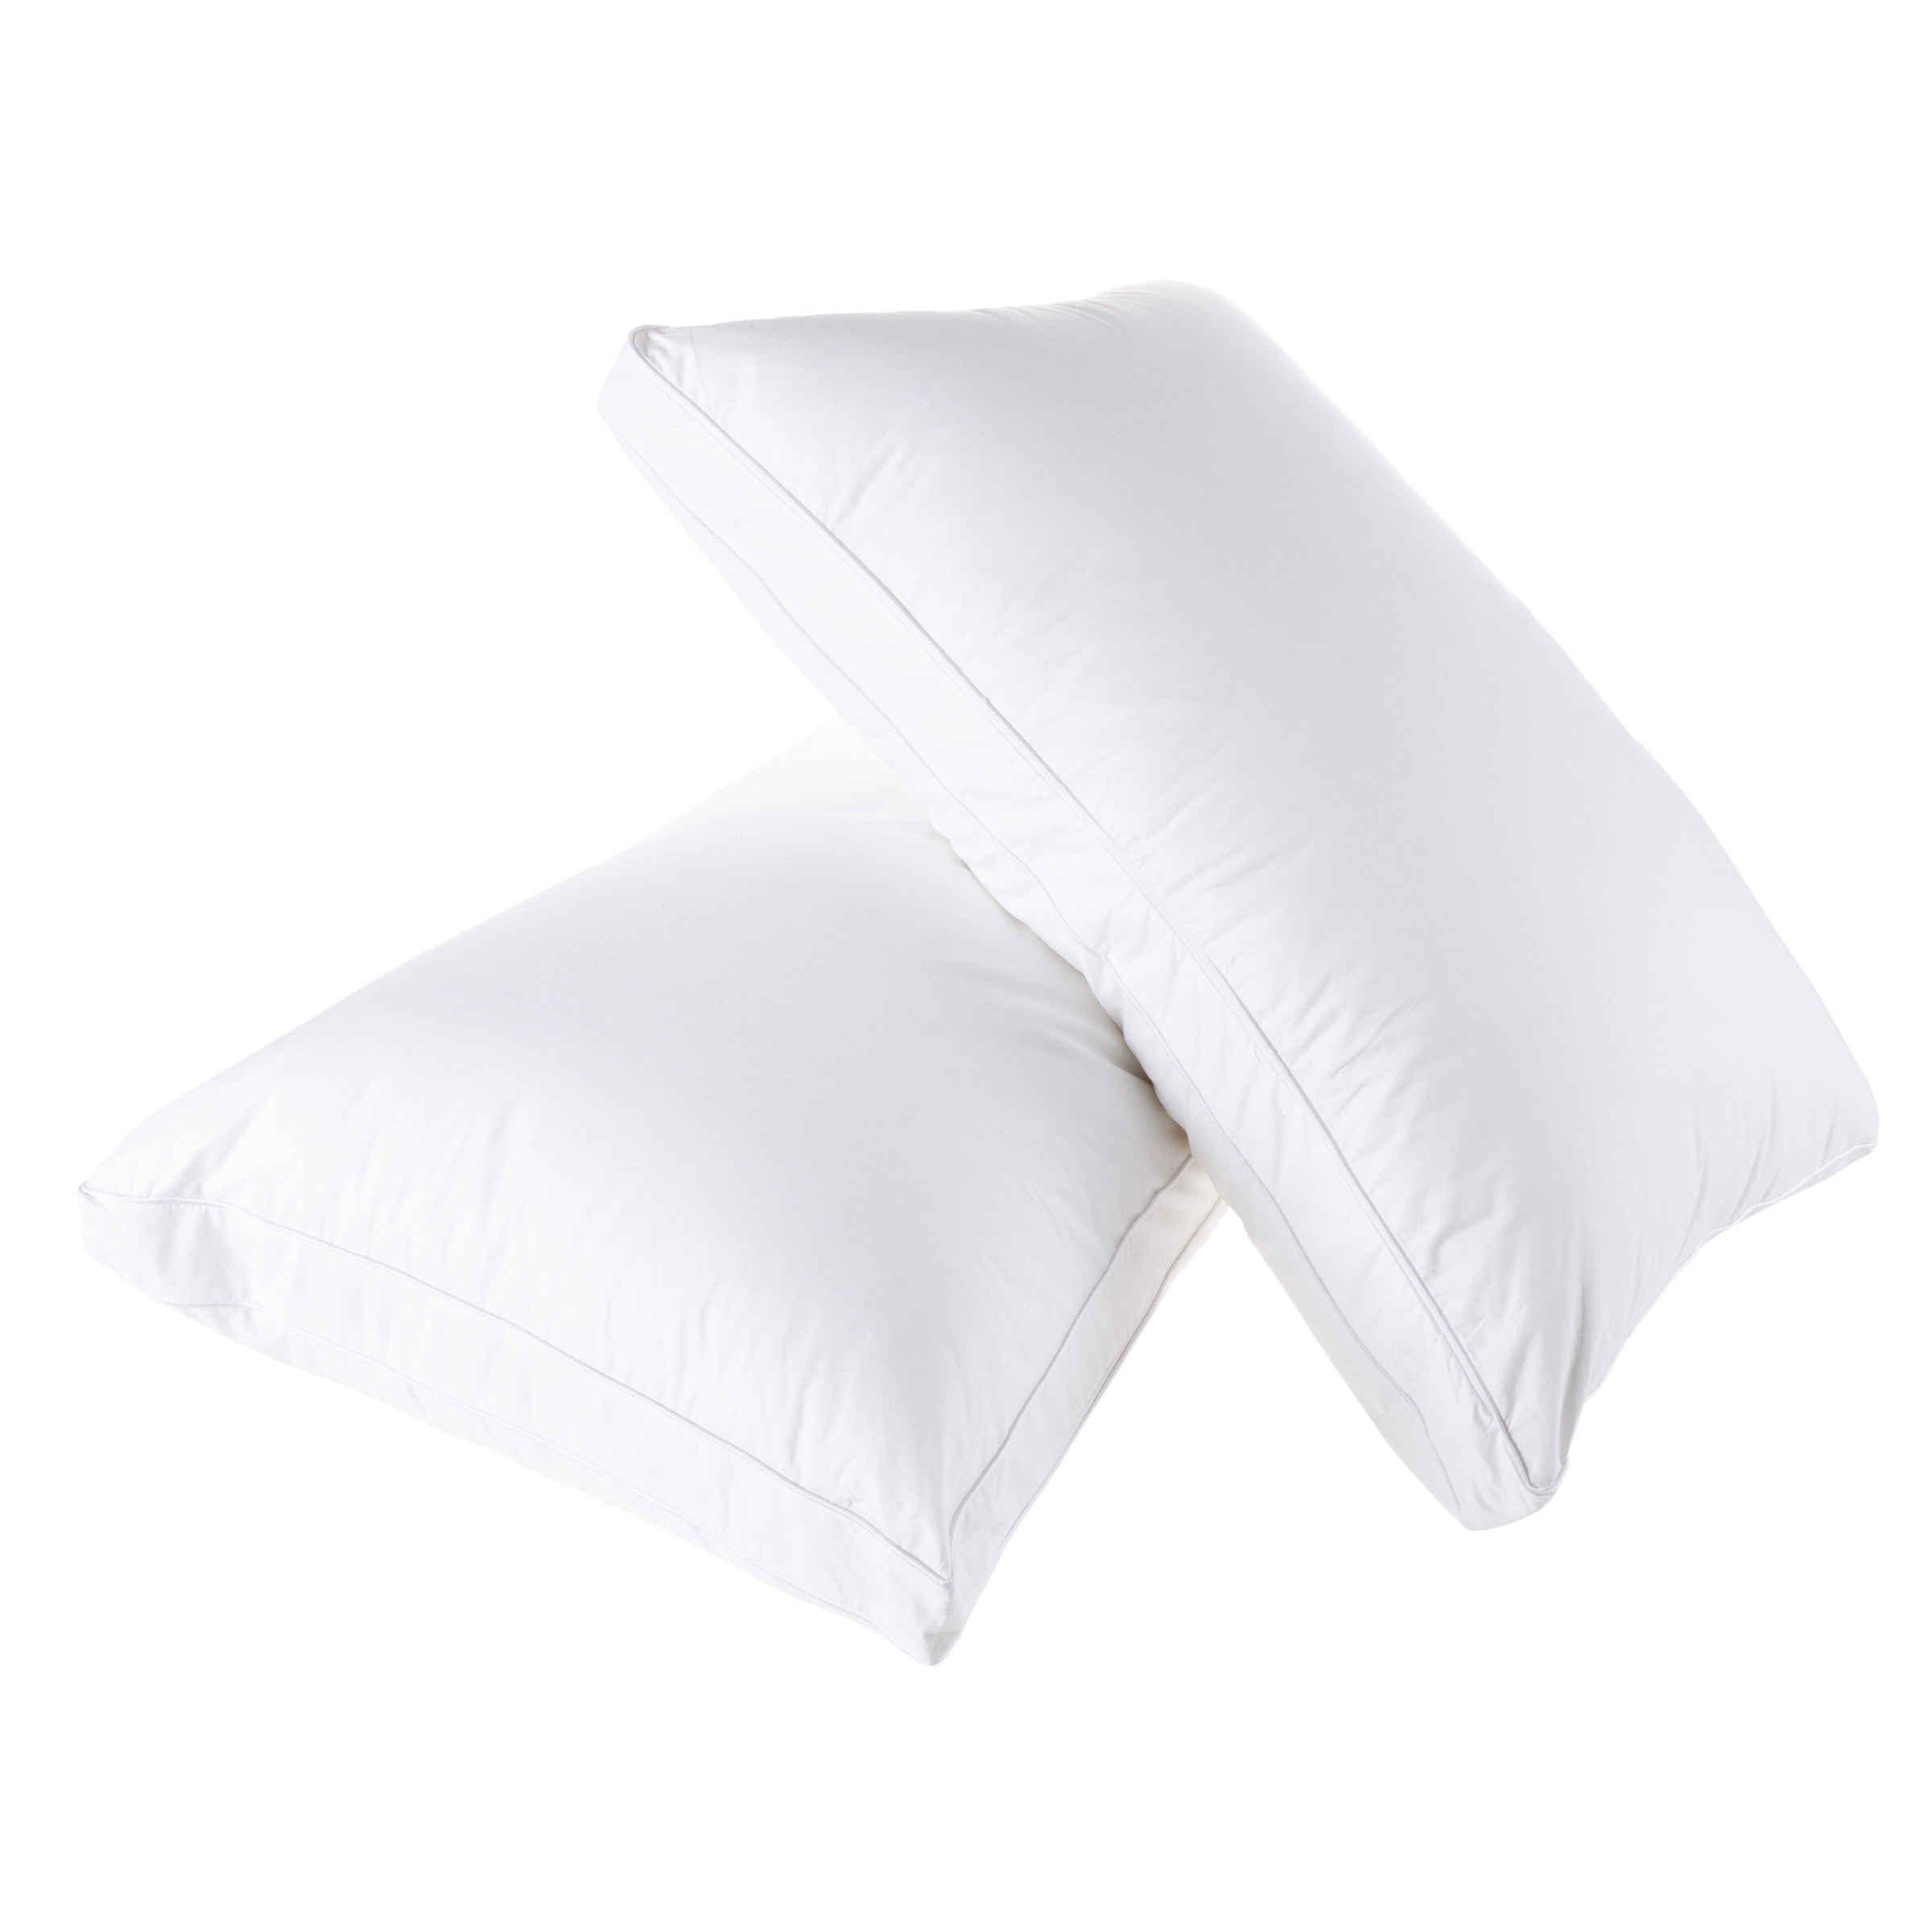 18” Plush Pillows – Set Of 2 Luxury Square Accent Pillow Inserts And Shag  Glam Covers – For Bedroom Or Living Room By Lavish Home (white) : Target